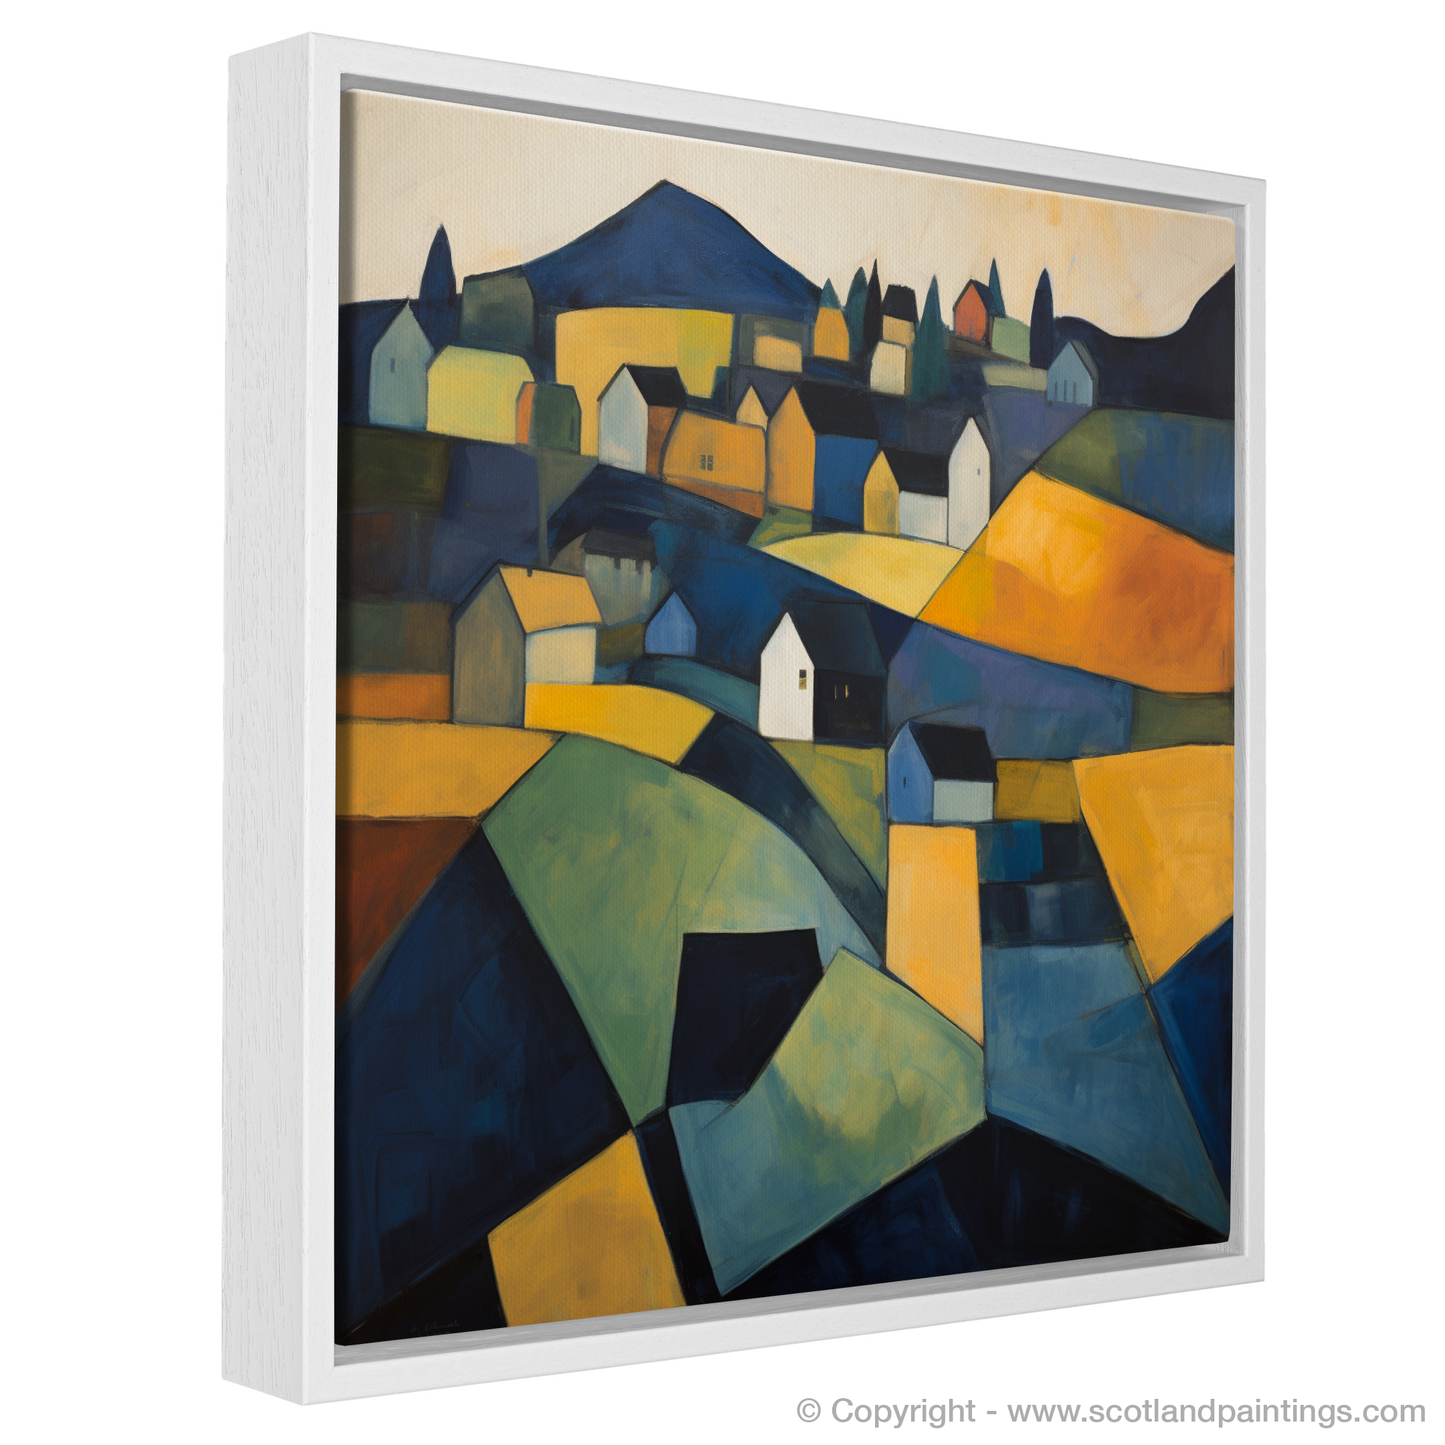 Painting and Art Print of Glenmore, Highlands entitled "Abstract Glenmore Tapestry".